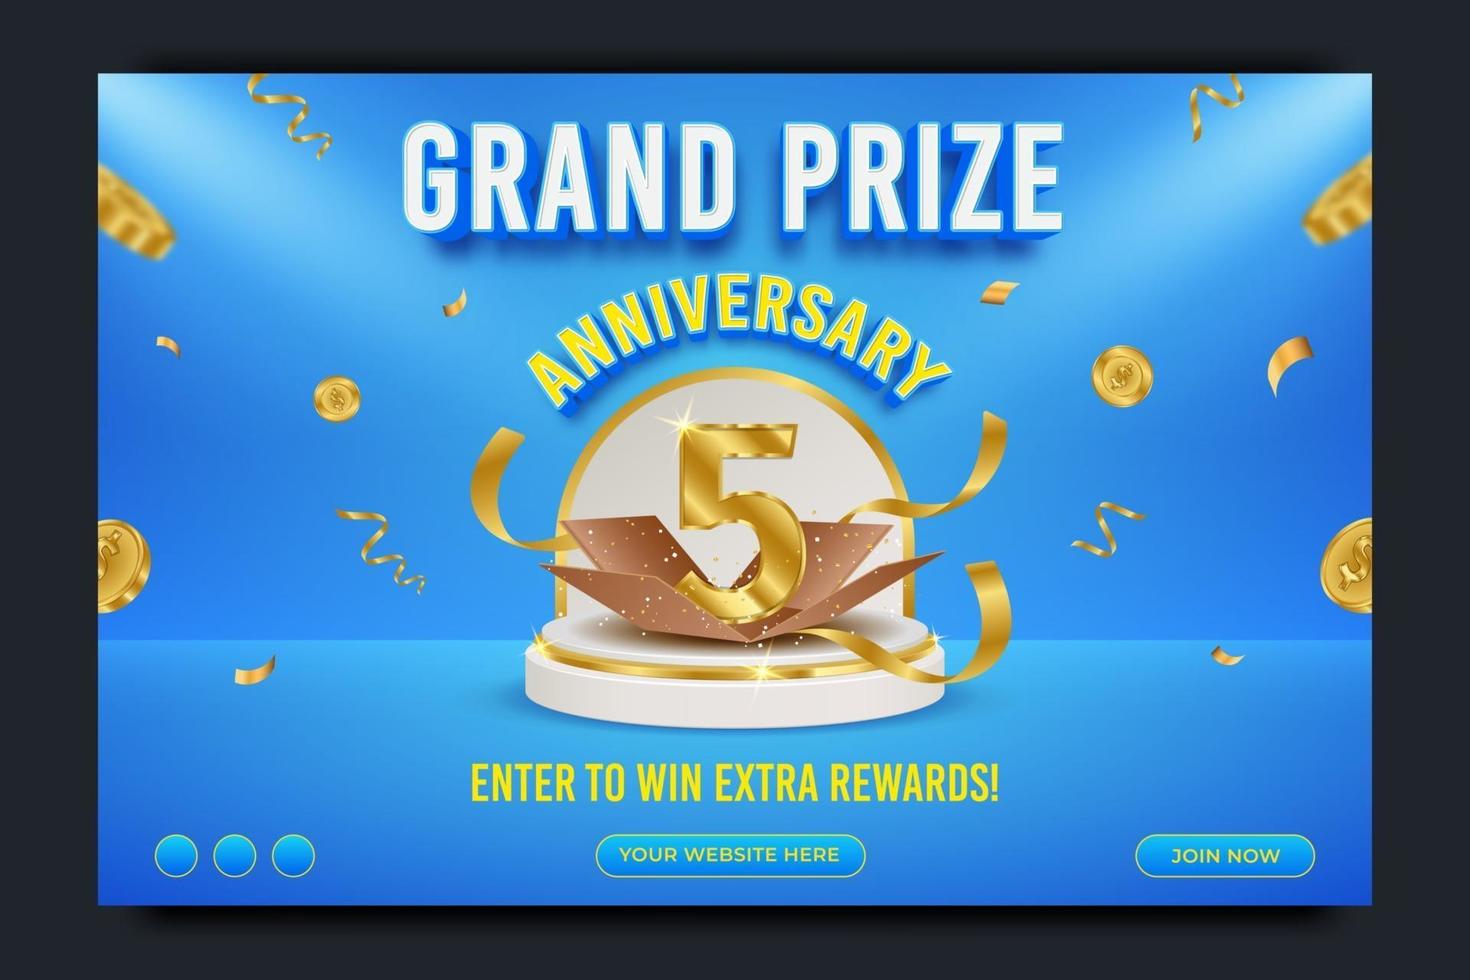 Grand prize anniversary horizontal banner template, realistic podium and flying gold coin, vector illustration.